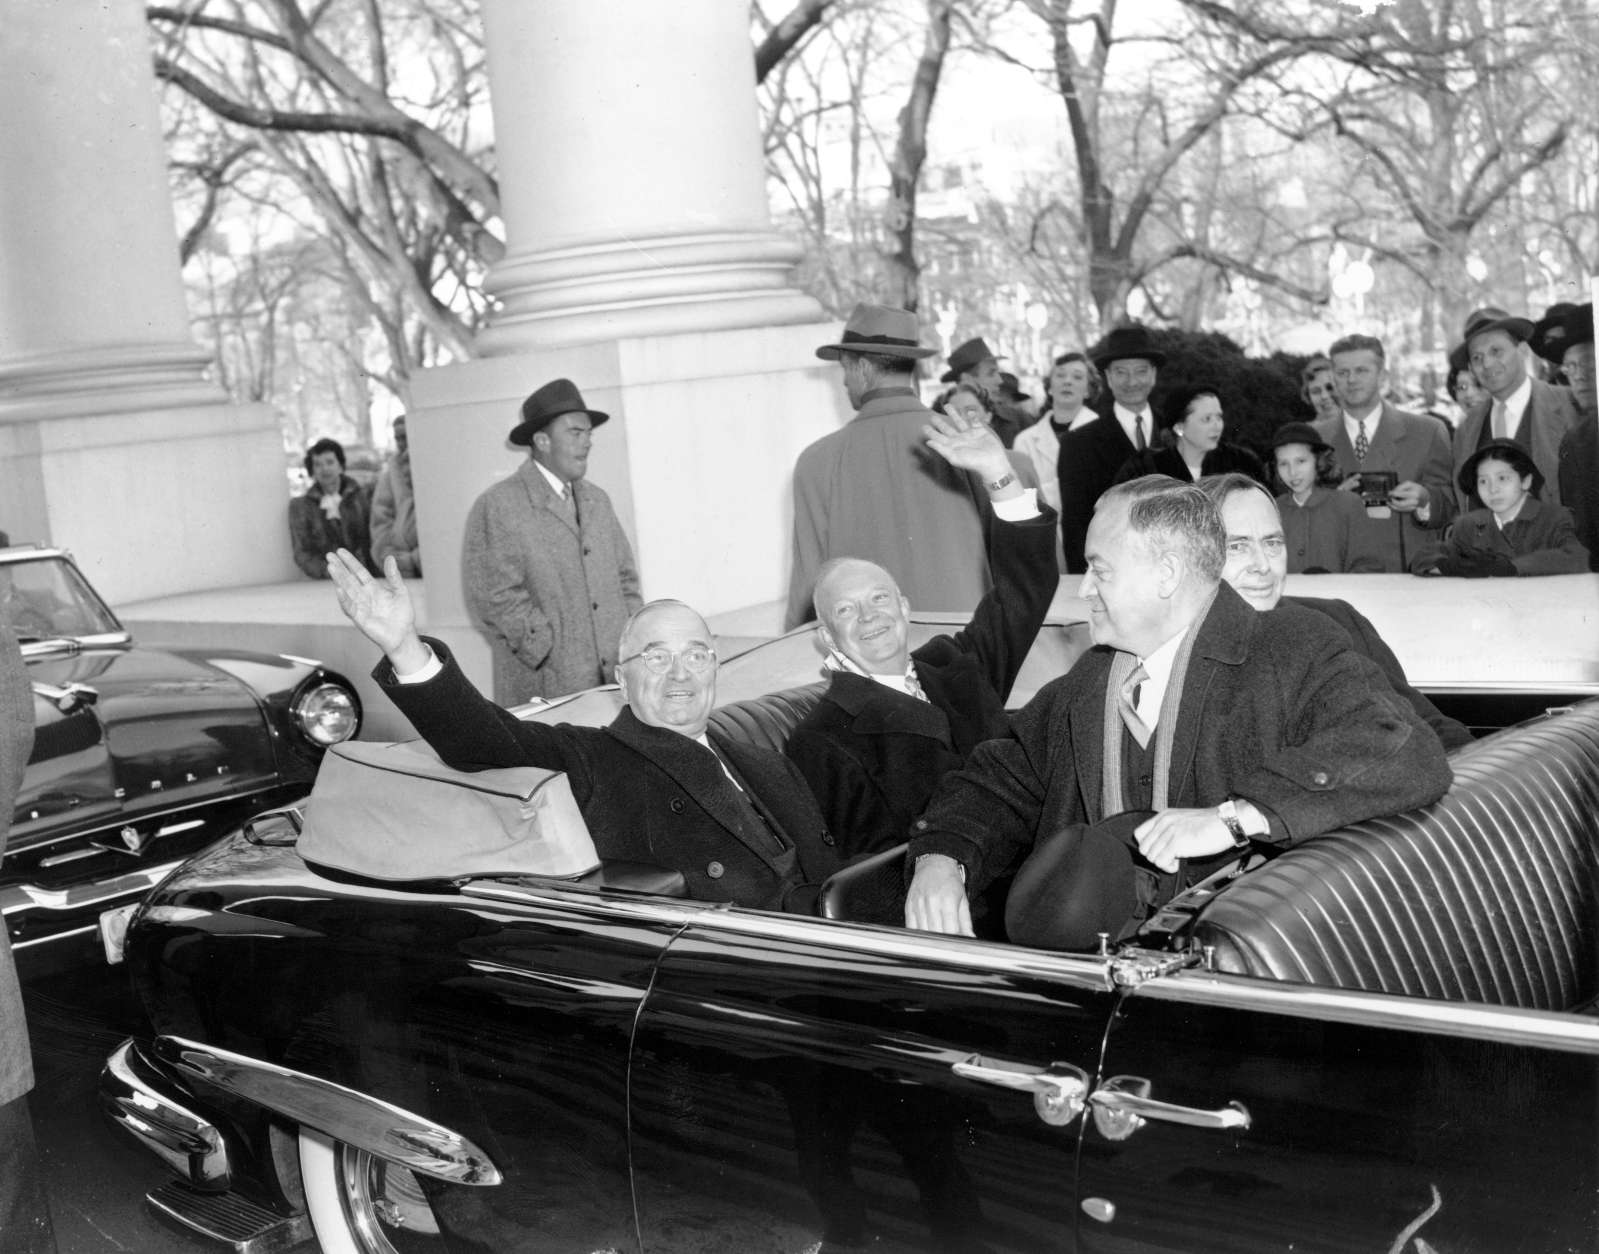 With smiles and a wave, U.S. President Harry Truman, left, and his successor, president-elect Dwight D. Eisenhower, leave the White House in an open car for inauguration ceremonies in Washington, D.C. on Jan. 20, 1953.  Sitting in the front is Sen. Styles Bridges of New Hampshire, and behind him is House Speaker Joe Martin.  (AP Photo)